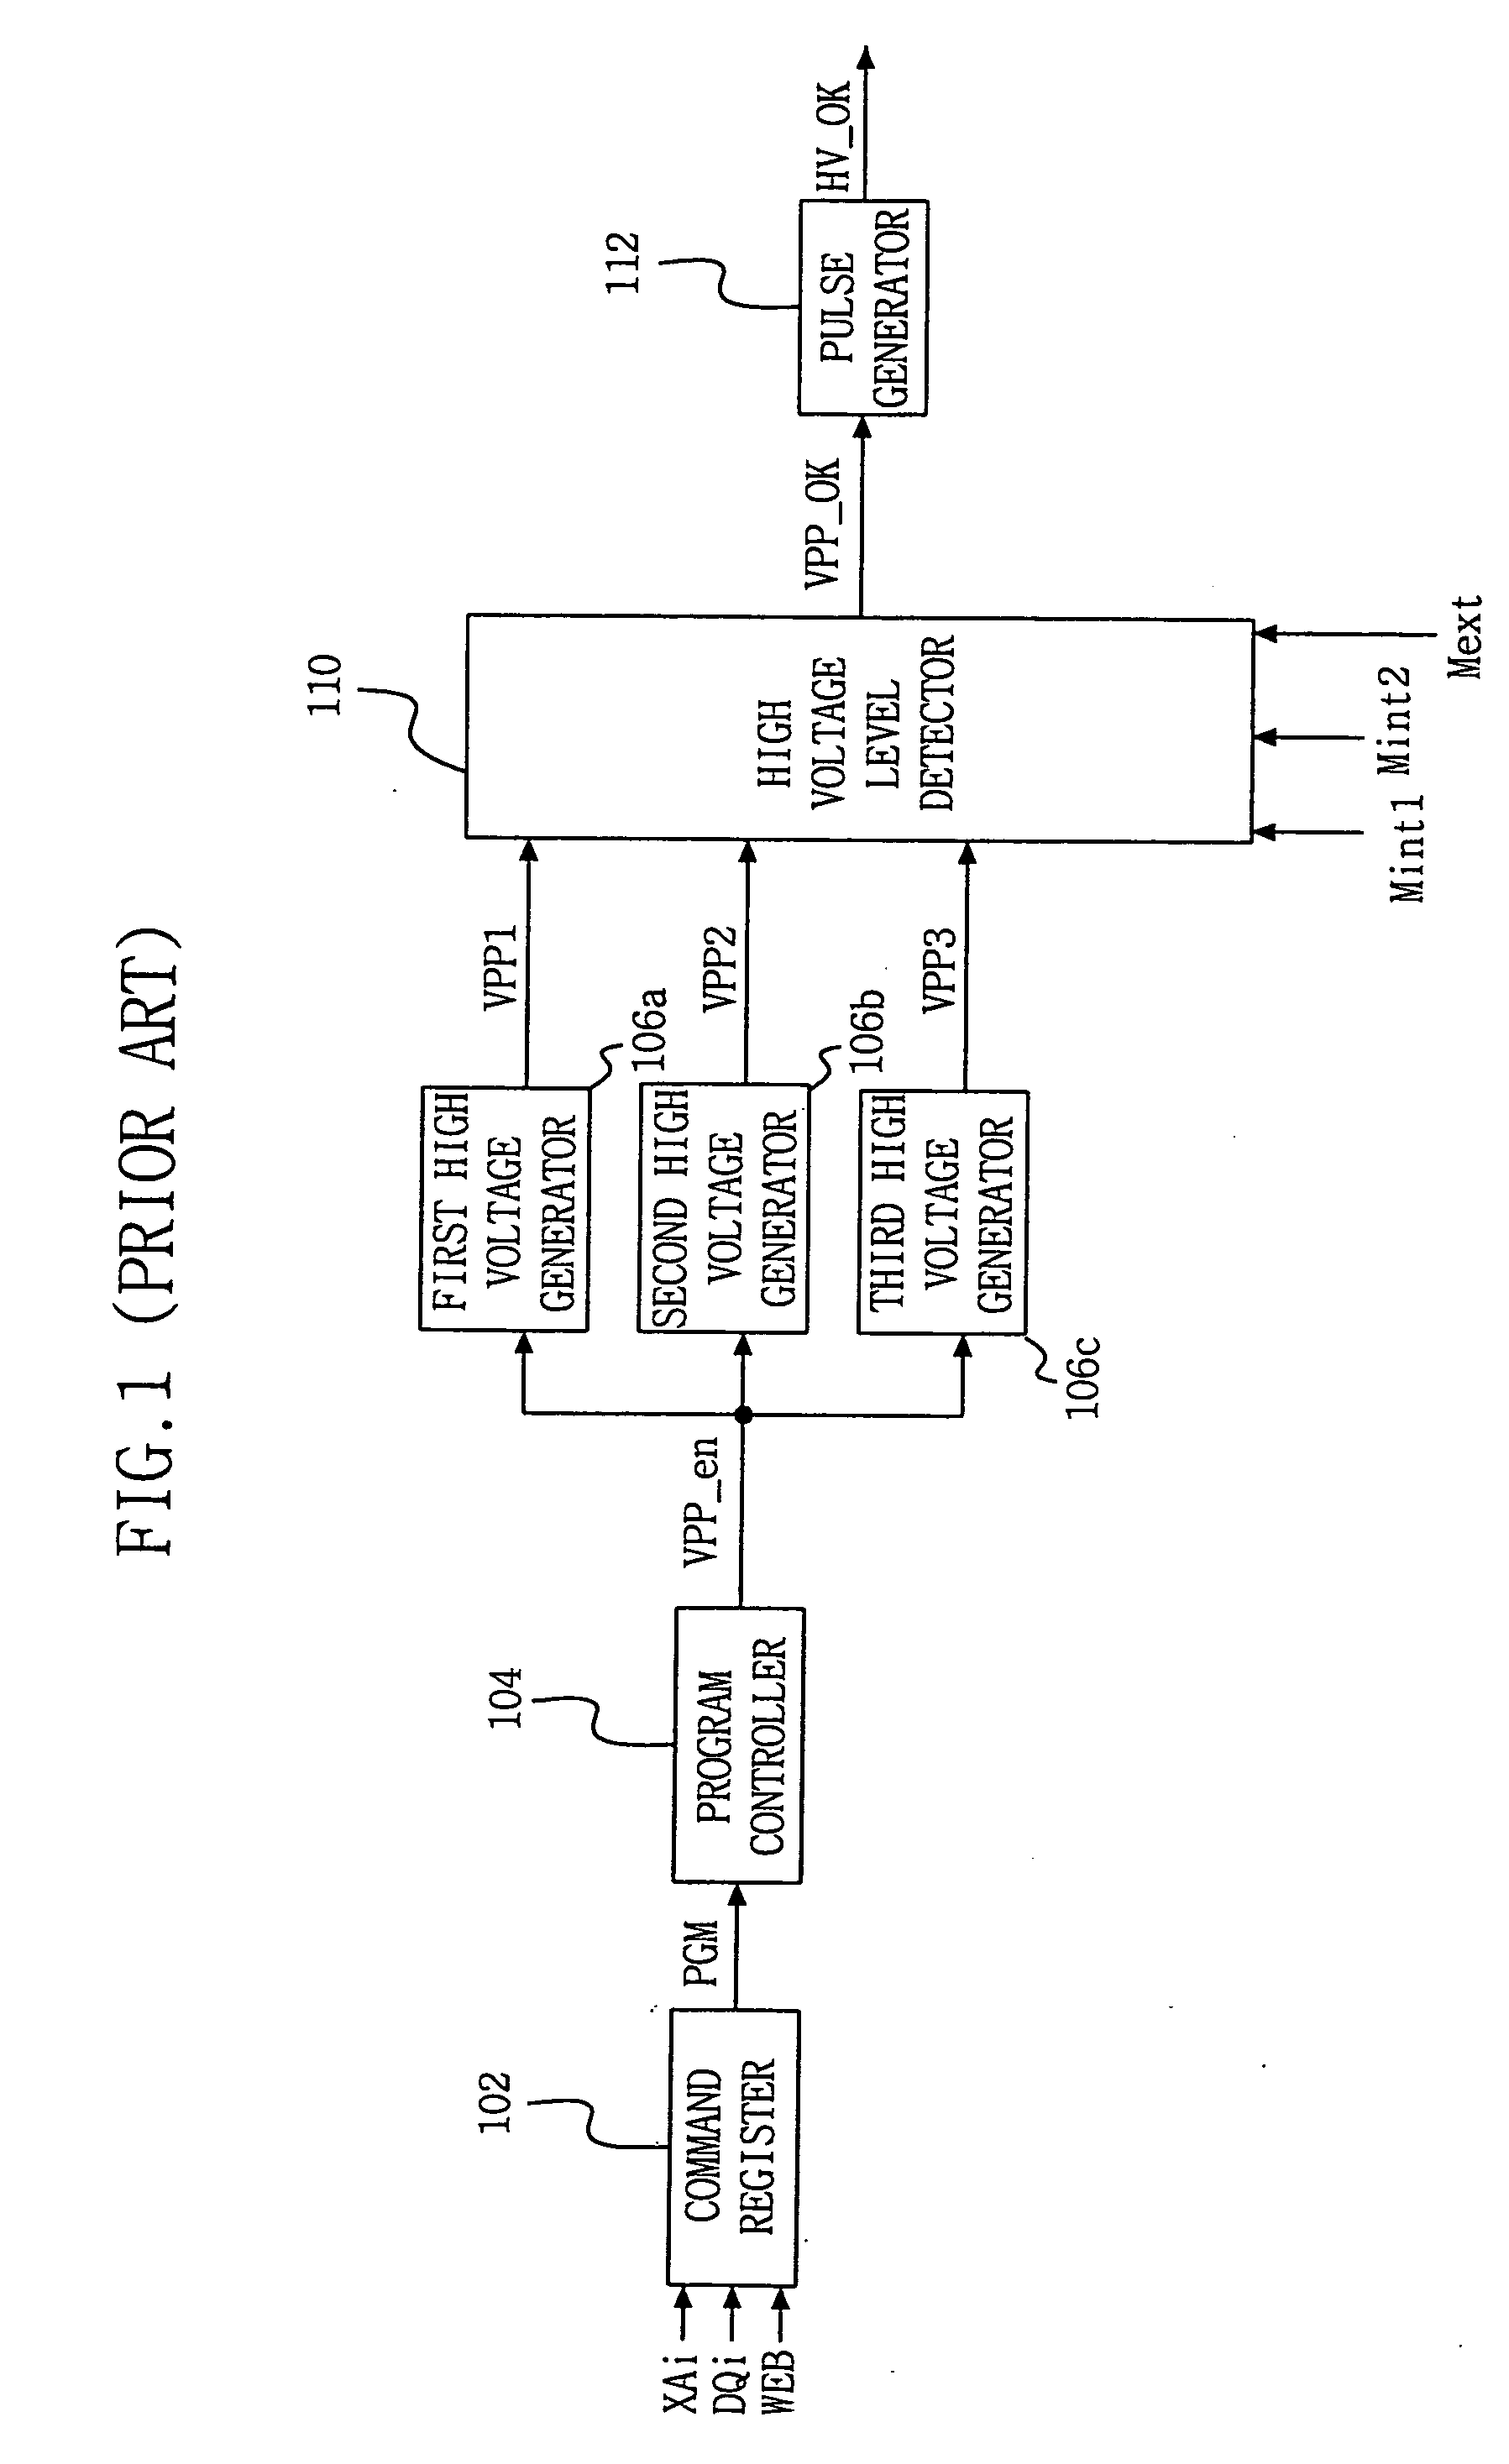 Power detector for use in a nonvolatile memory device and method thereof